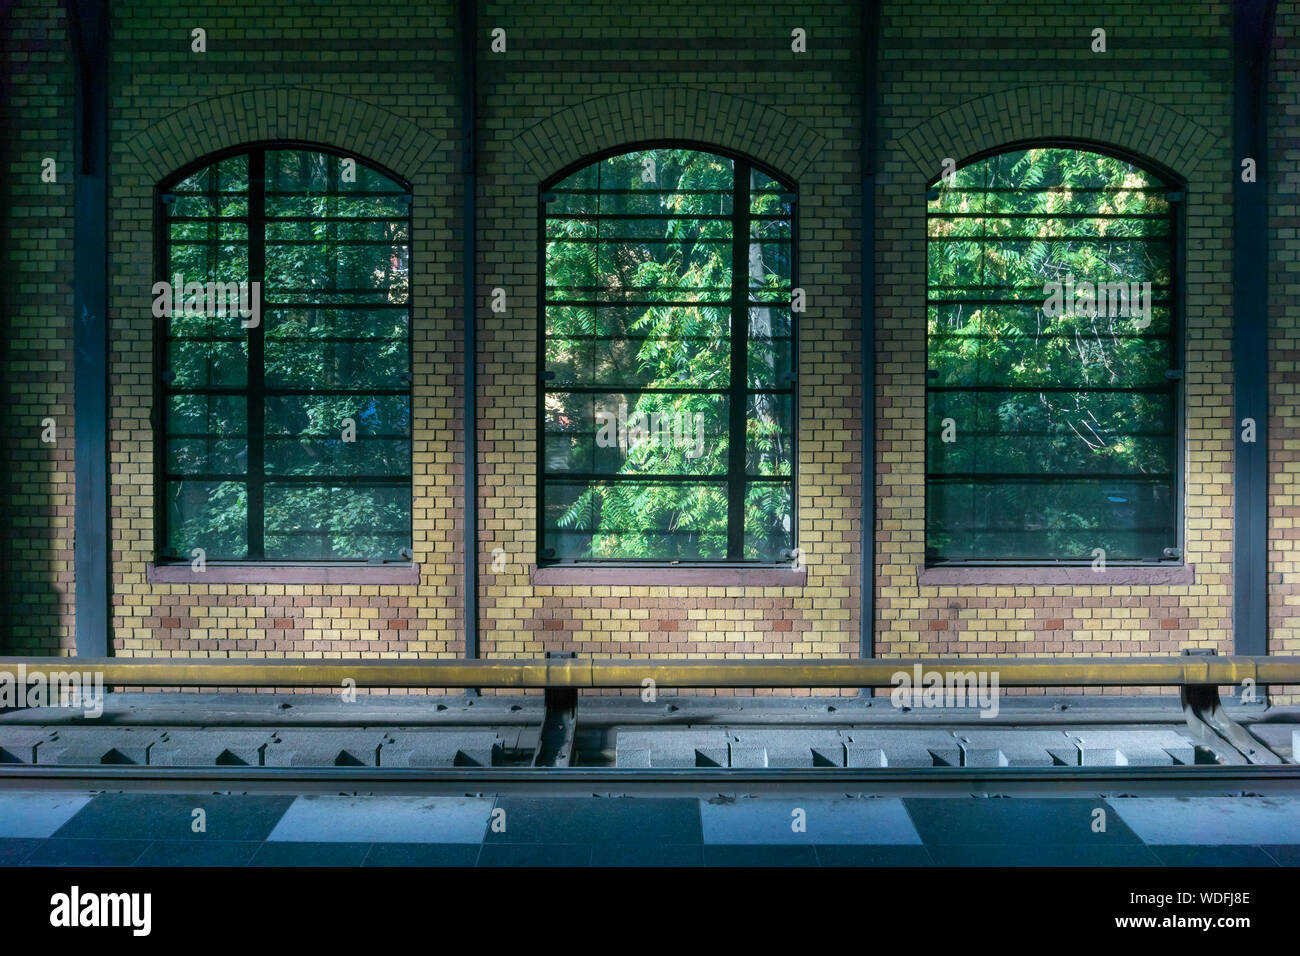 Trees Seen Through Windows By Old S-bahn Station Stock Photo